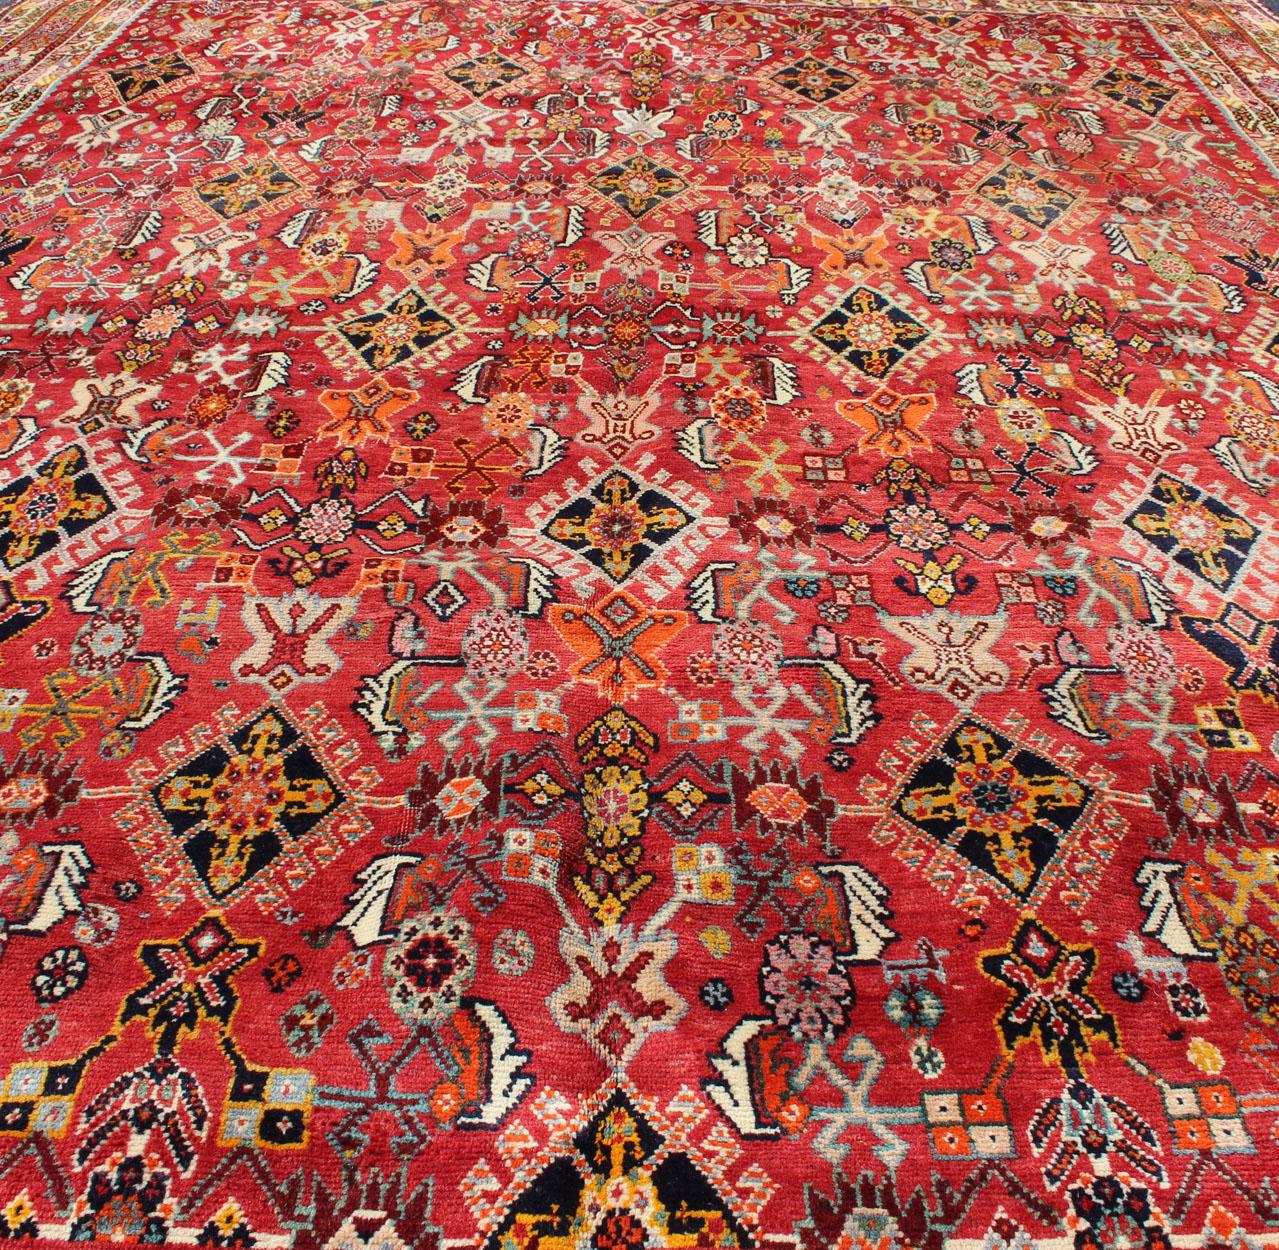 Wool Vintage Shiraz/Qashgai Persian Rug in All-Over Design in Red and Multi-Colors